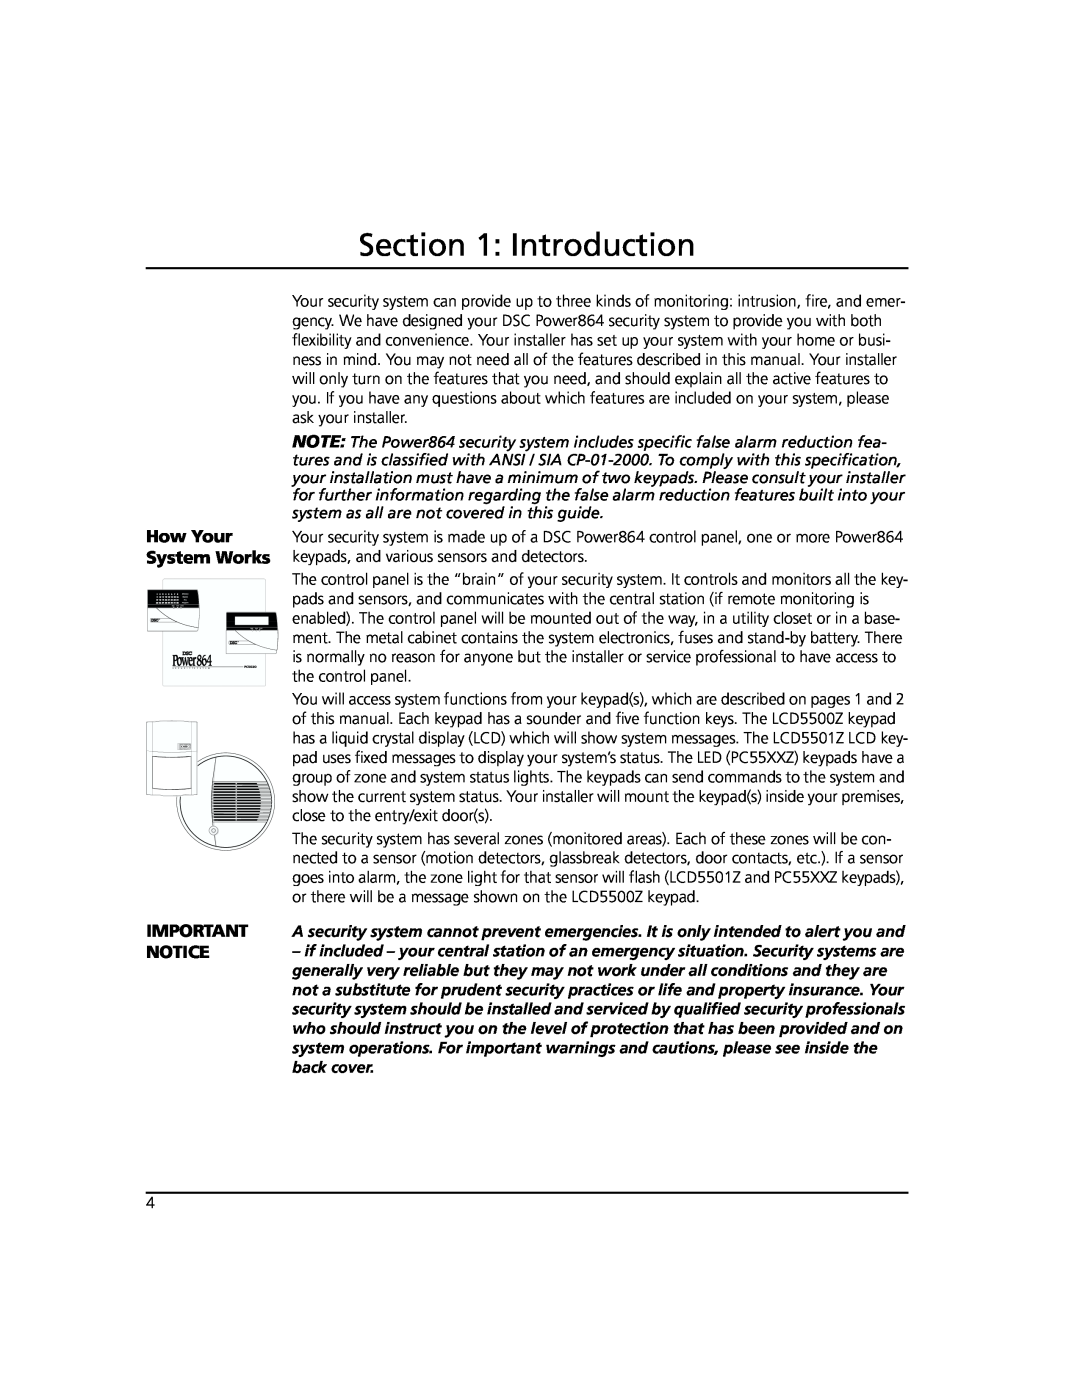 ADT Security Services Power 864 manual Introduction, How Your System Works IMPORTANT NOTICE 